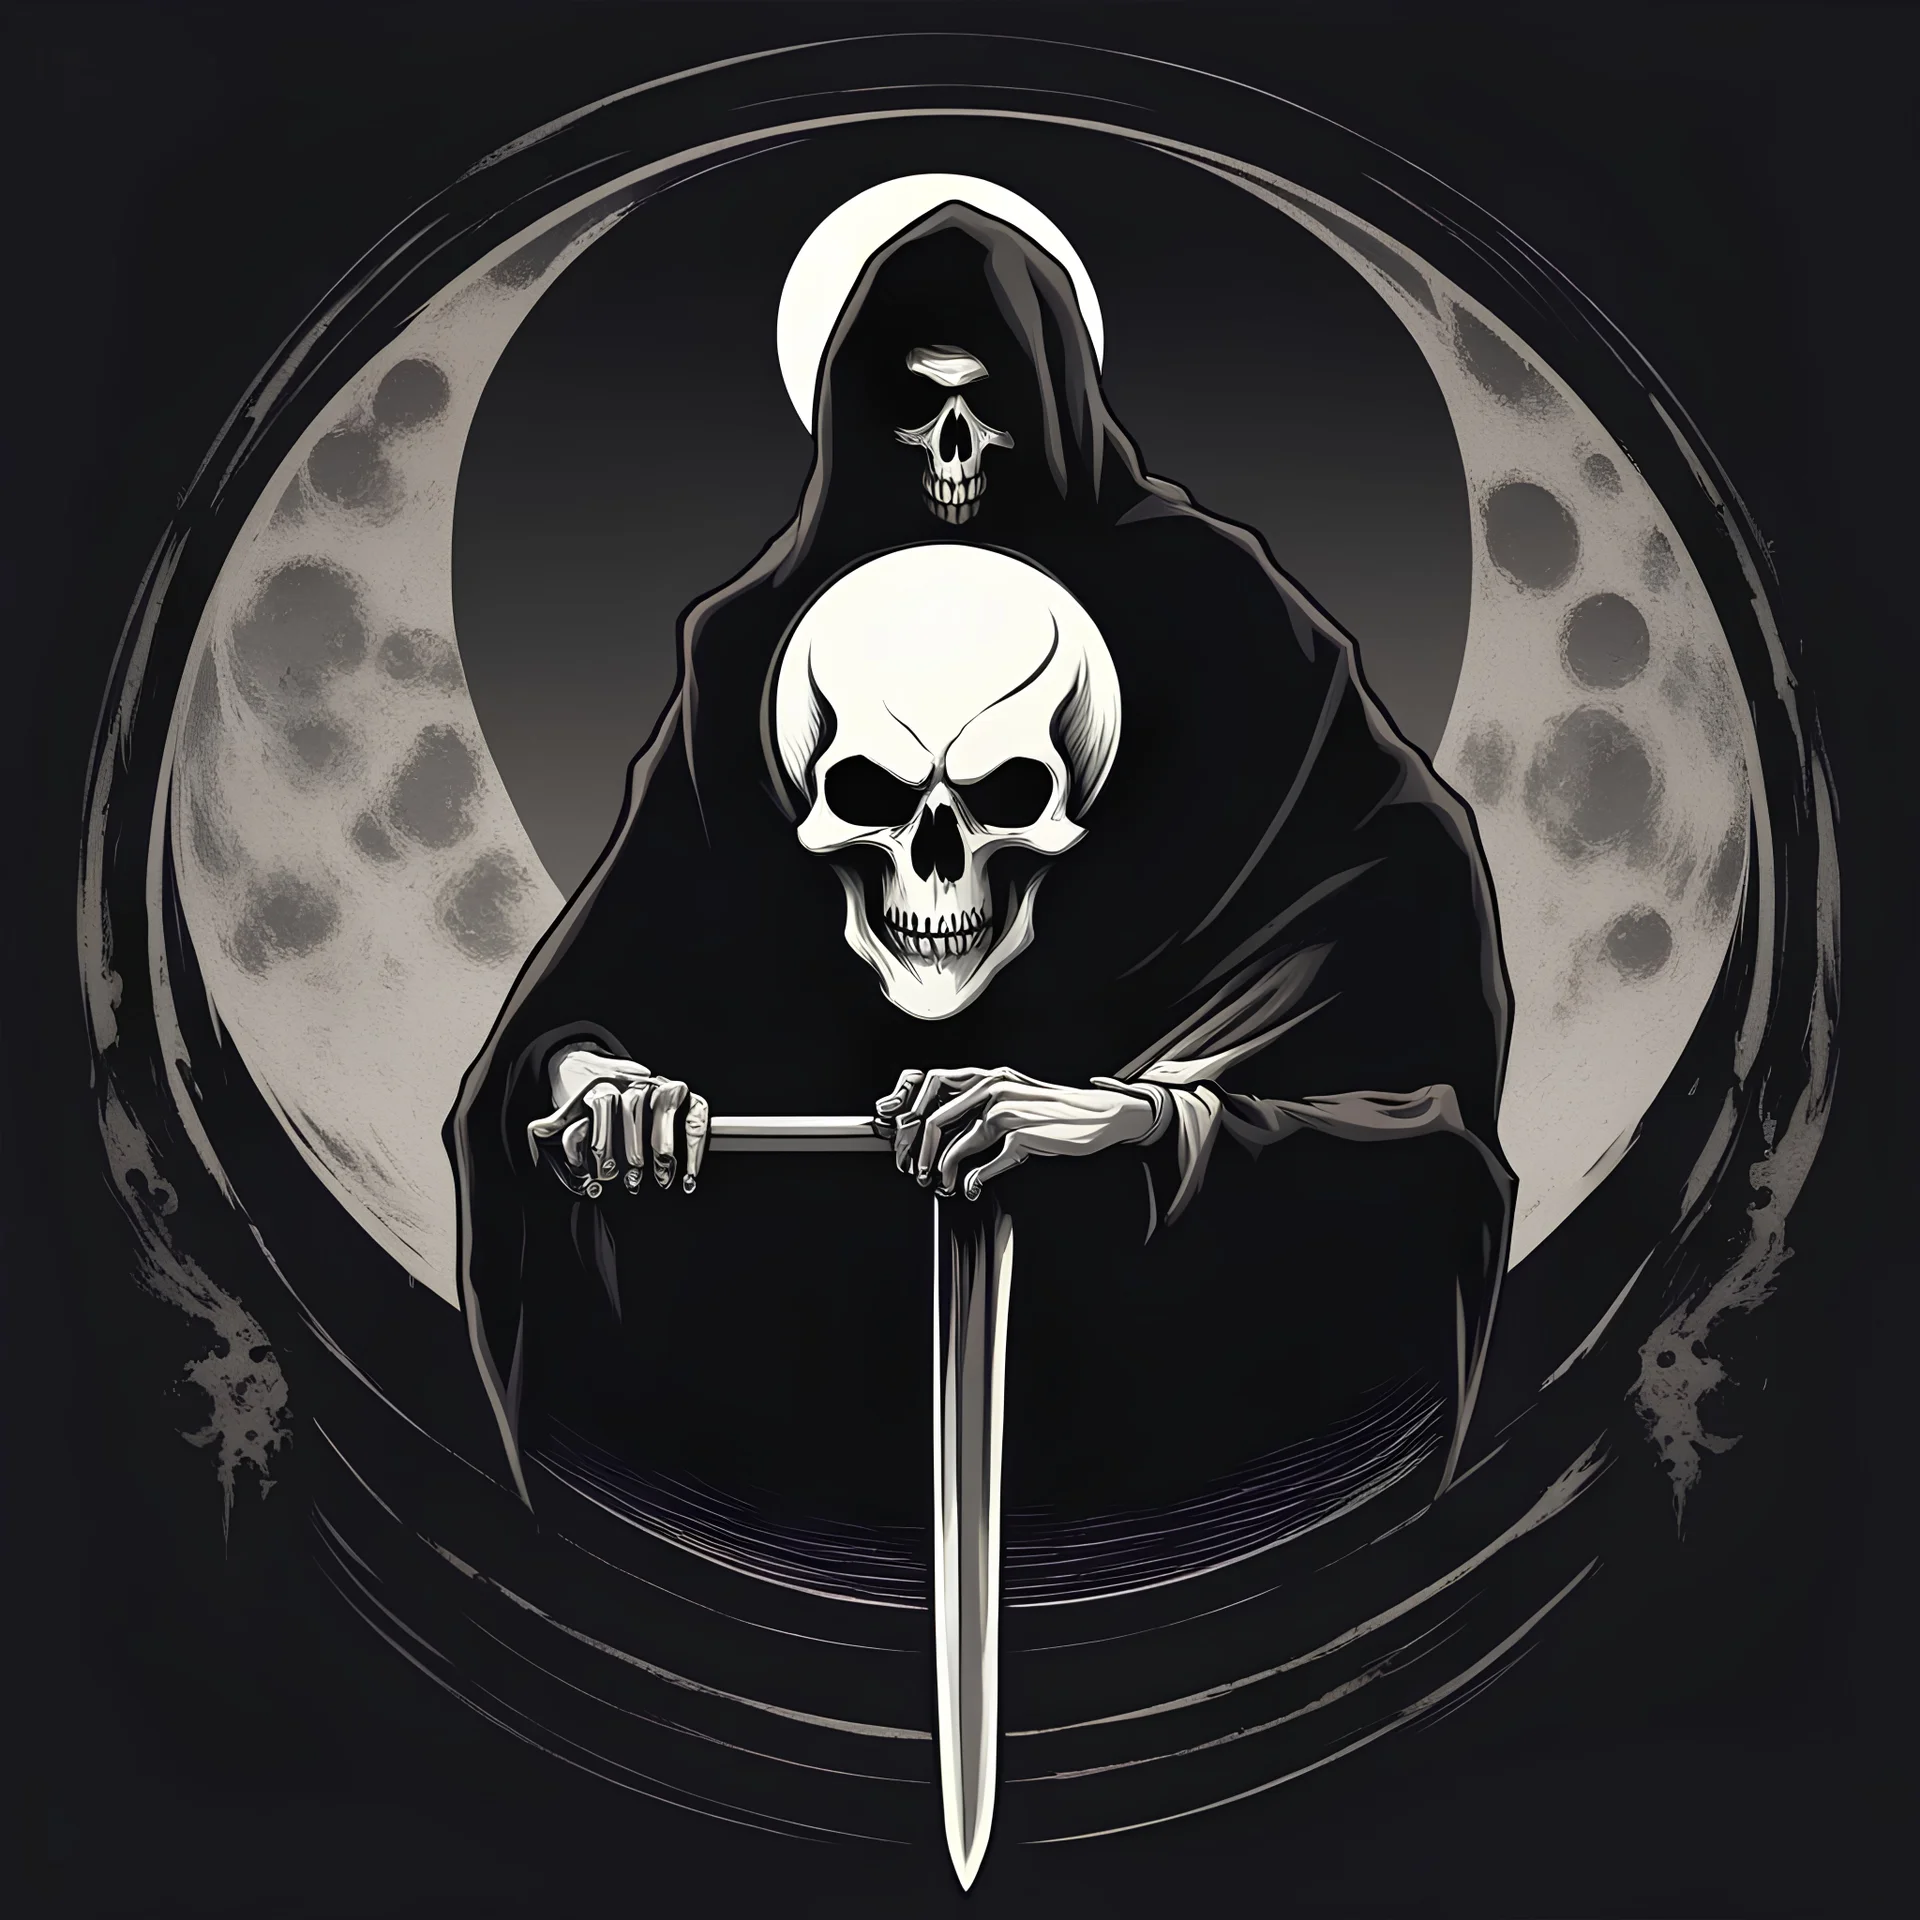 a minimal logo for a brand called "Reaper's Moon Digital Art" perfect text, simple, cloaked grim reaper skull superimposed over a full moon, scythe within the curve of the moon